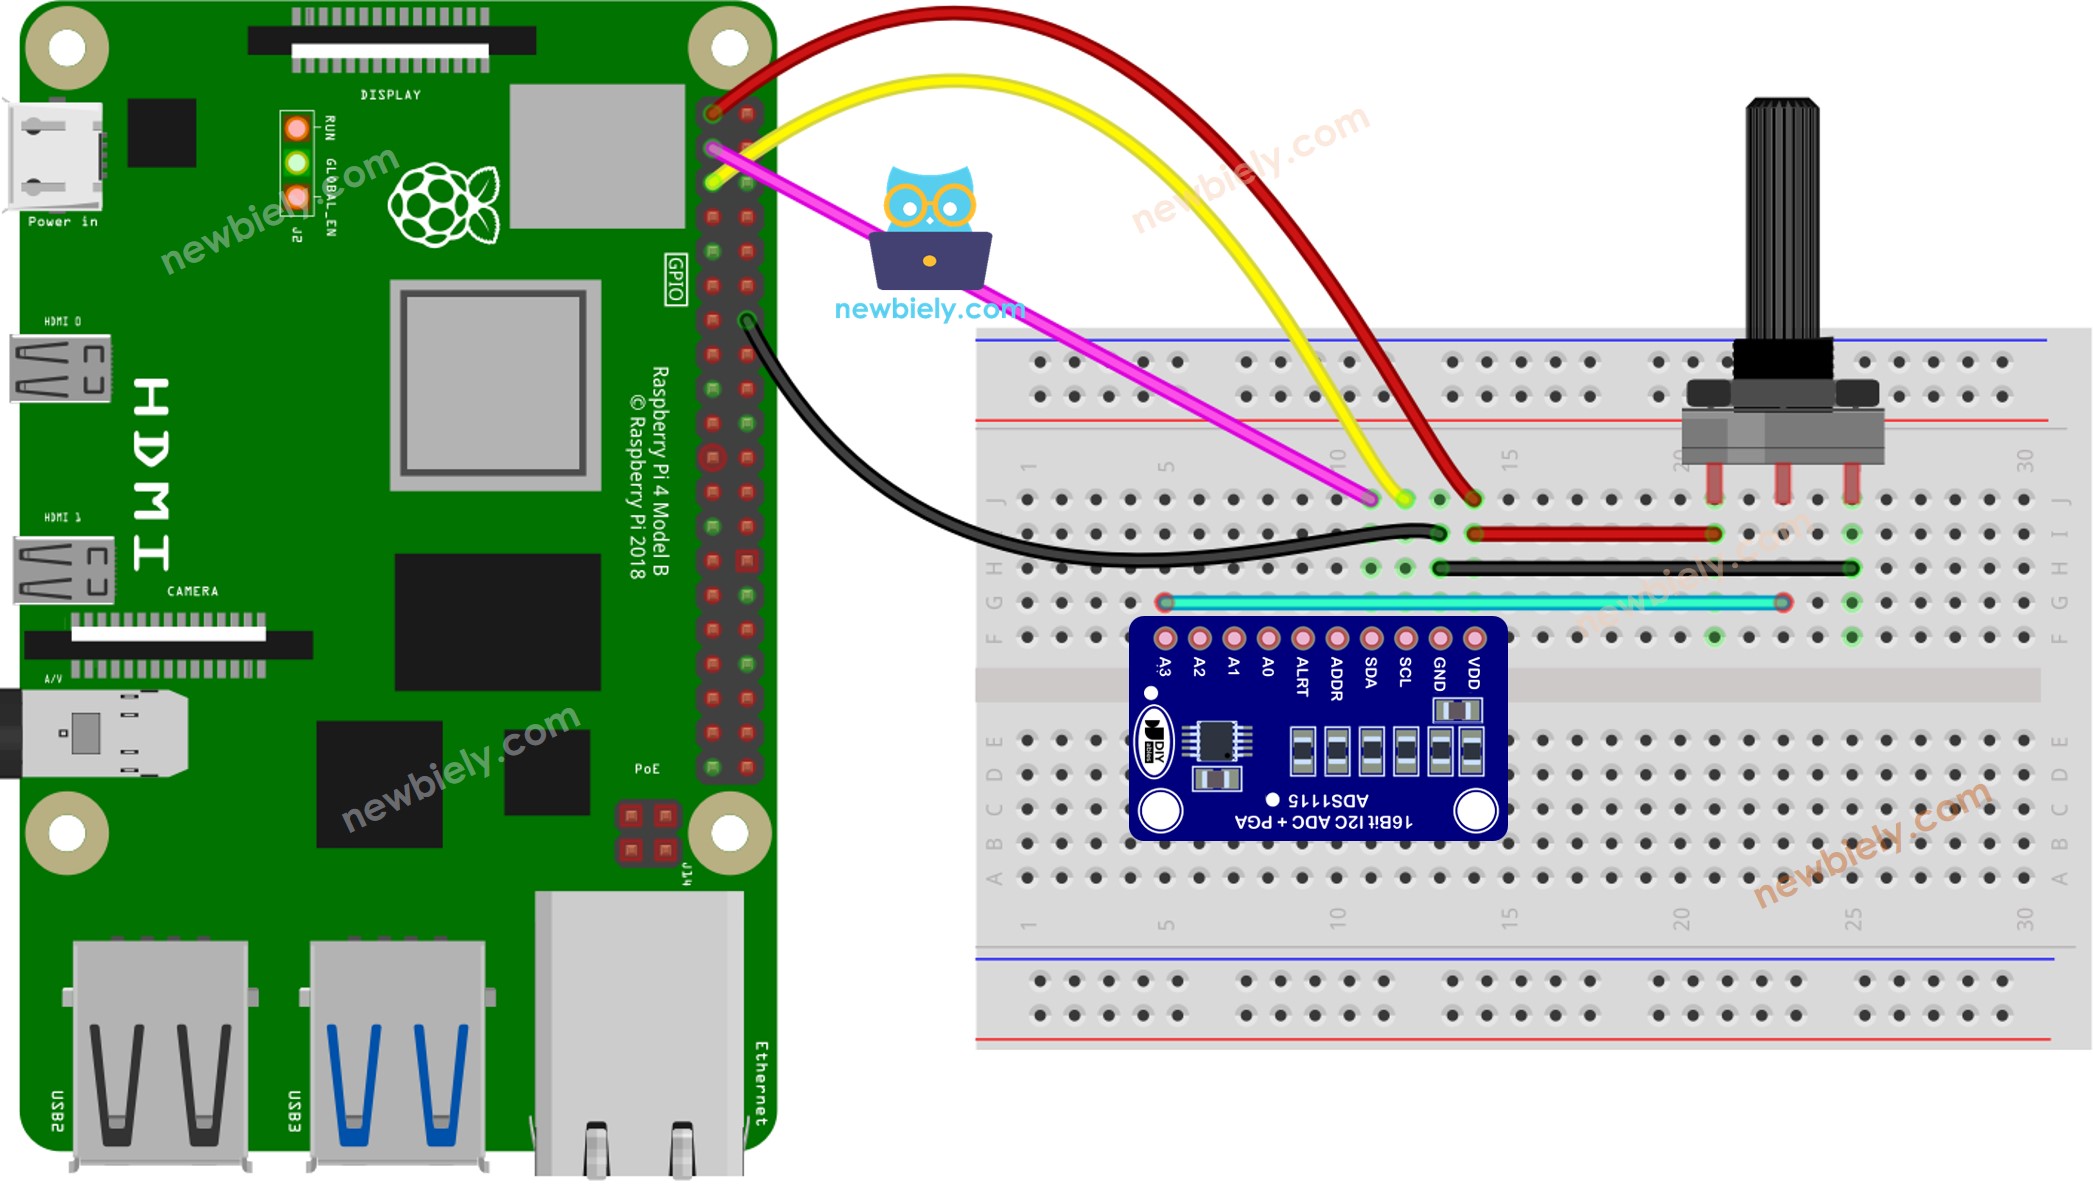 The wiring diagram between Raspberry Pi and ADS1115